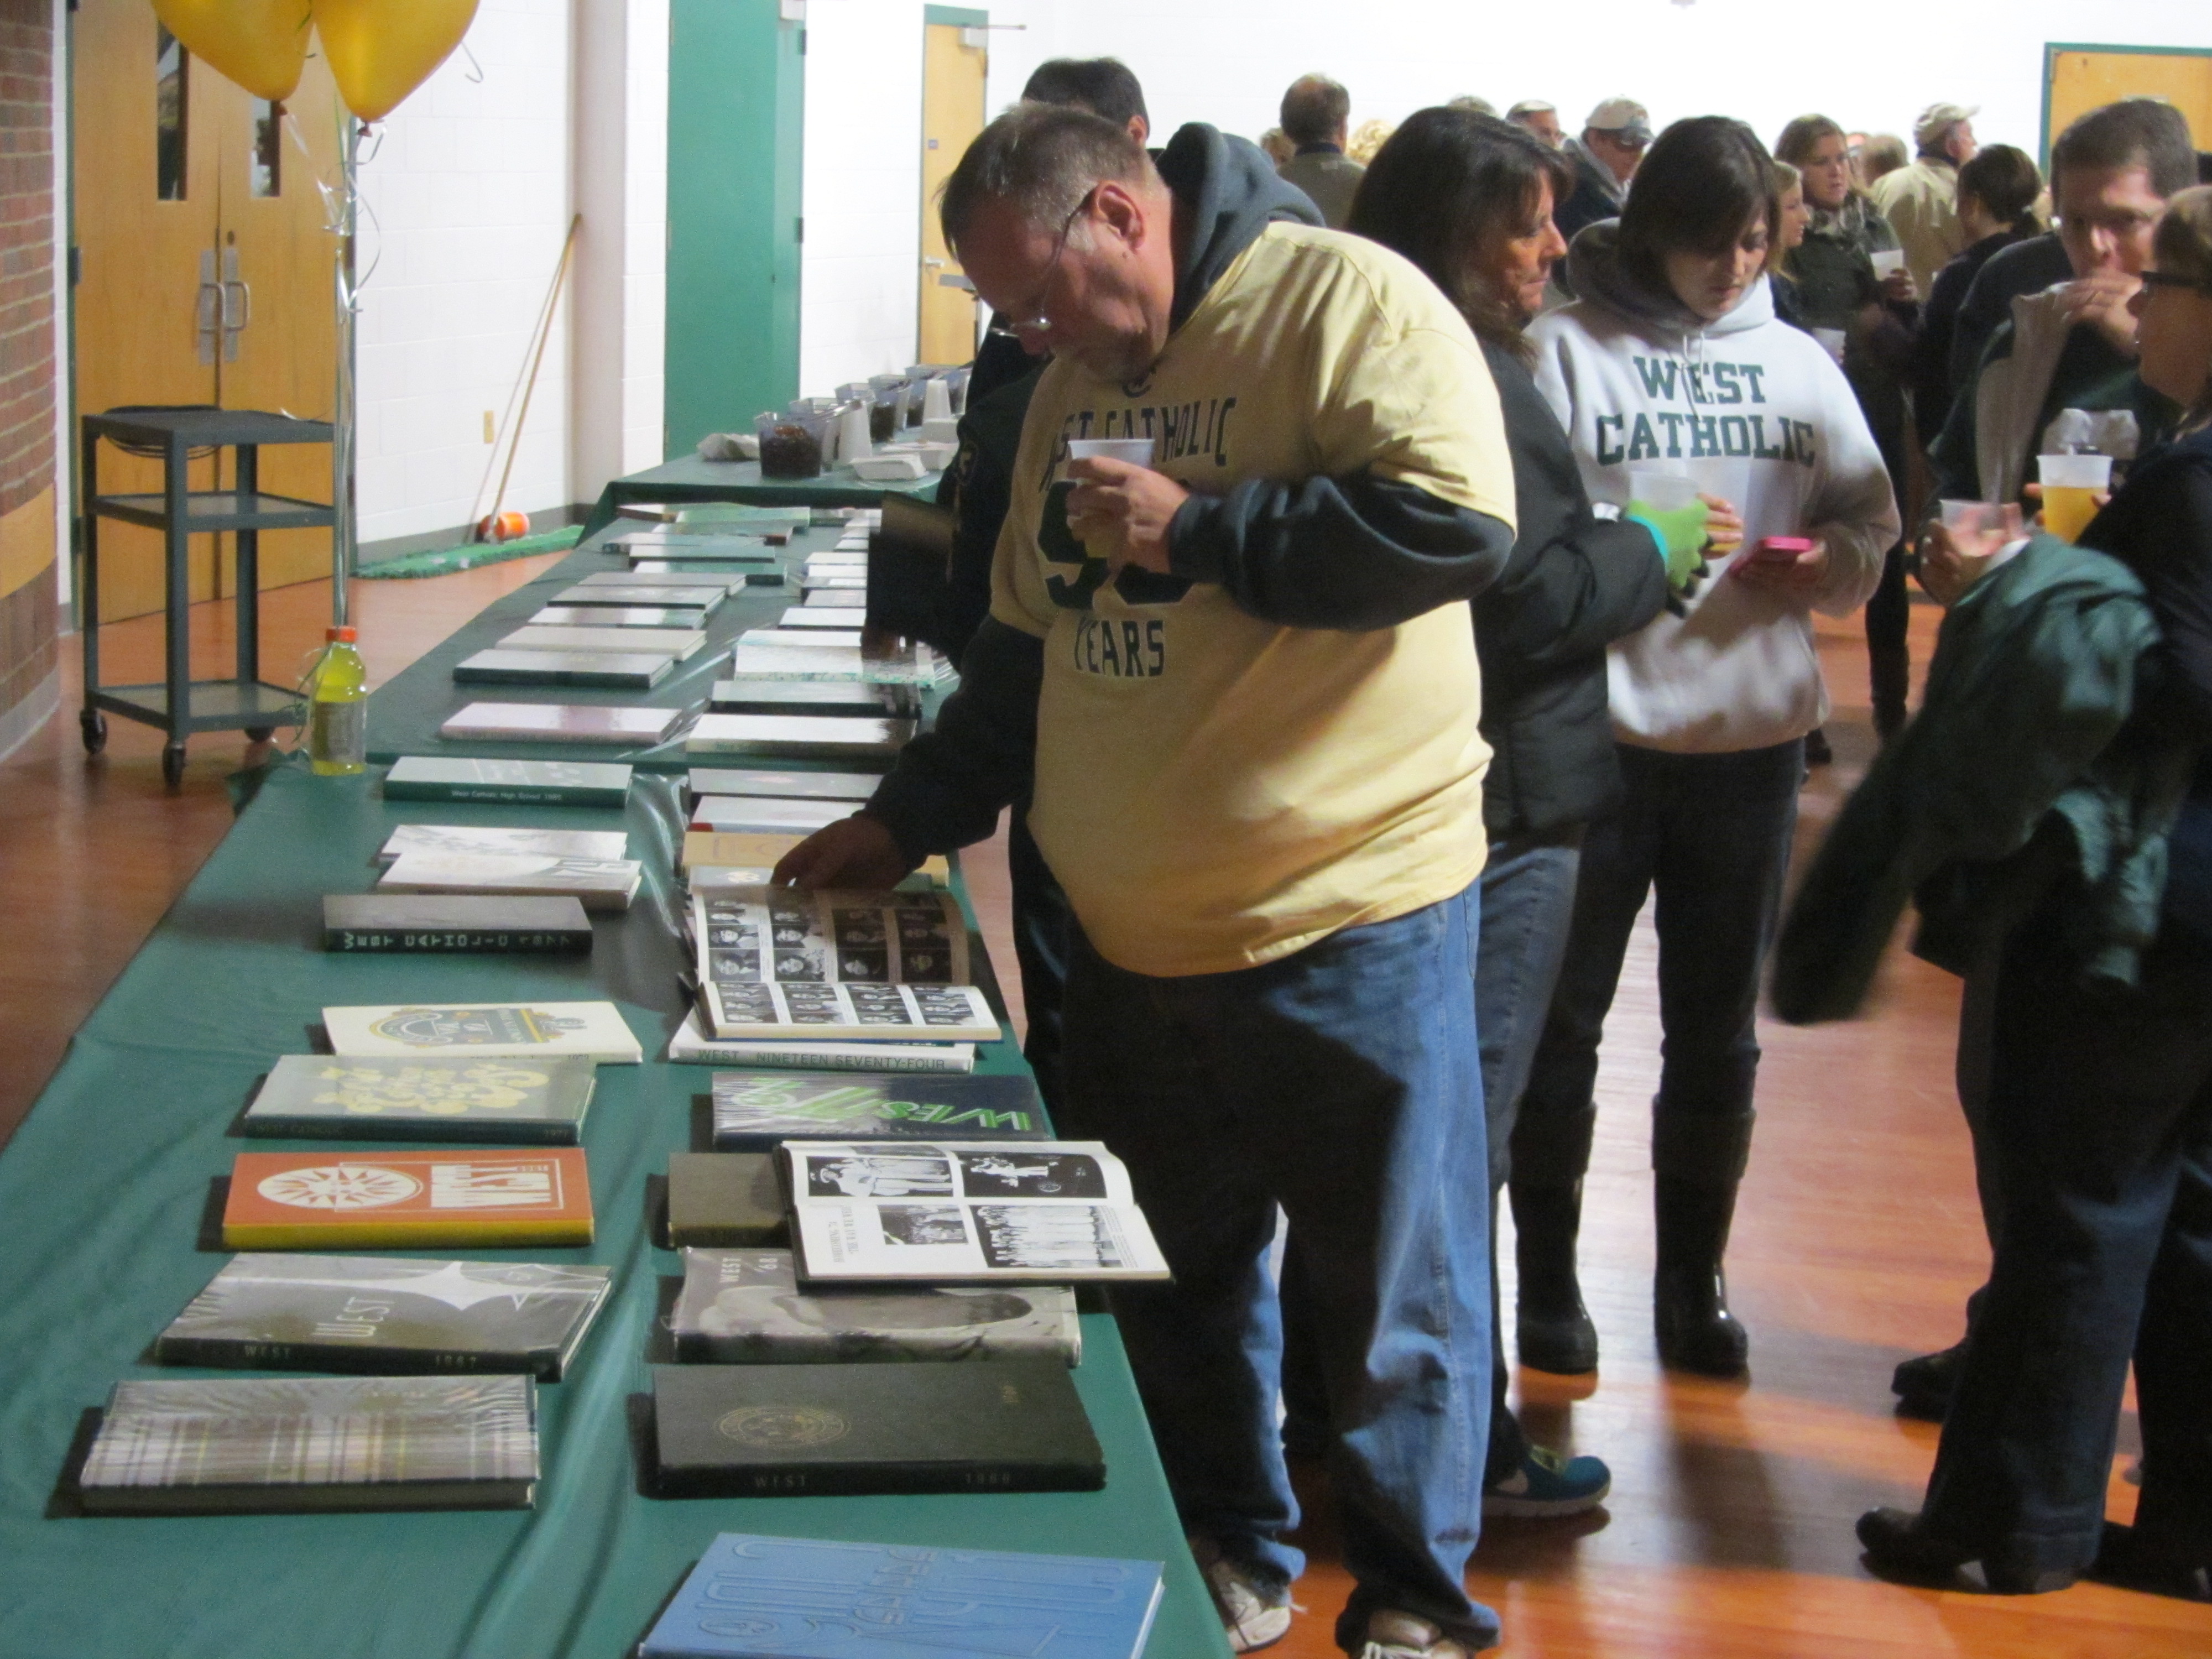 Perusing yearbooks at the all-alumni 50th Anniversary Homecoming 5th Quarter party